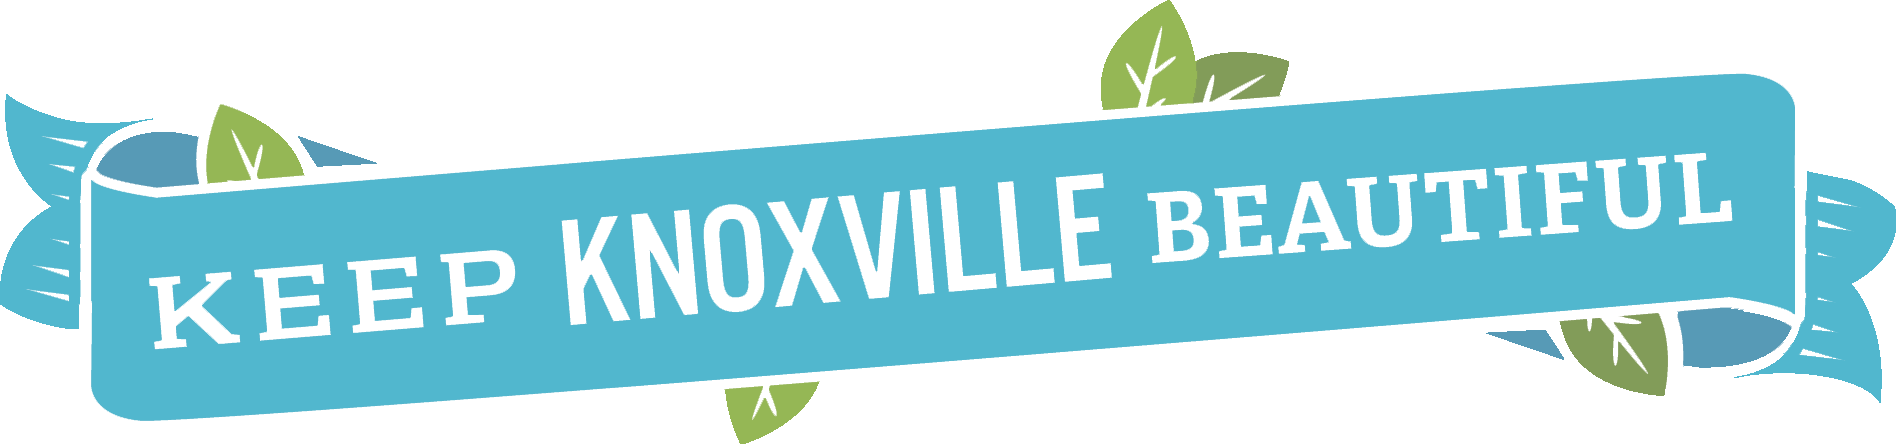  Keep Knoxville Beautiful